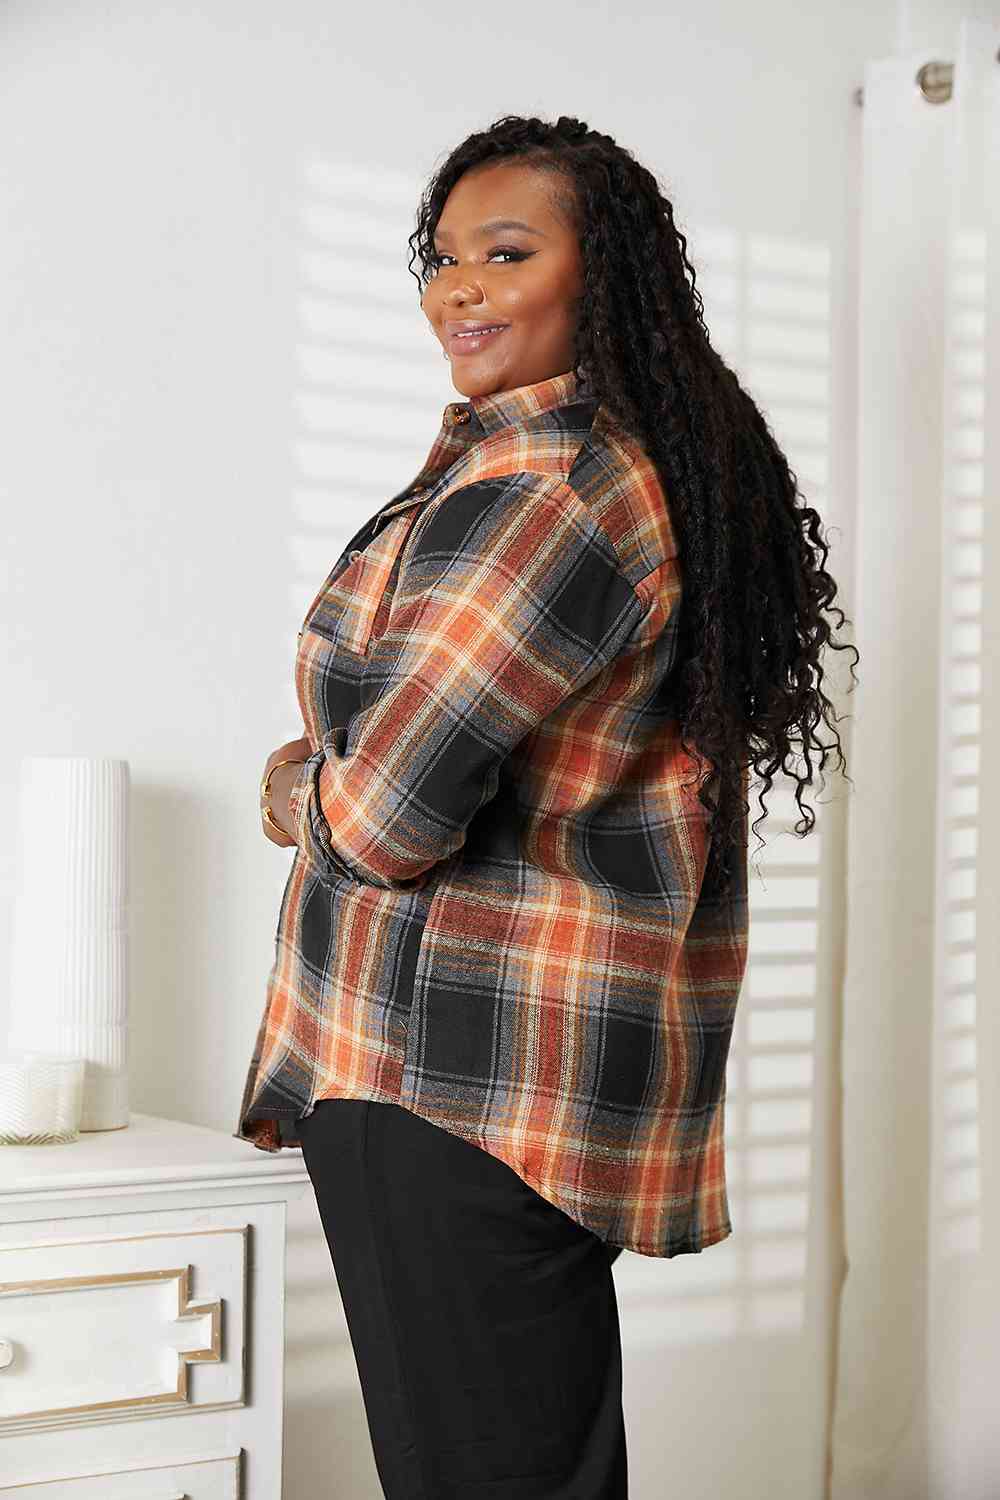 Double Take Plaid Dropped Shoulder Shirt - Dixie Hike & Style